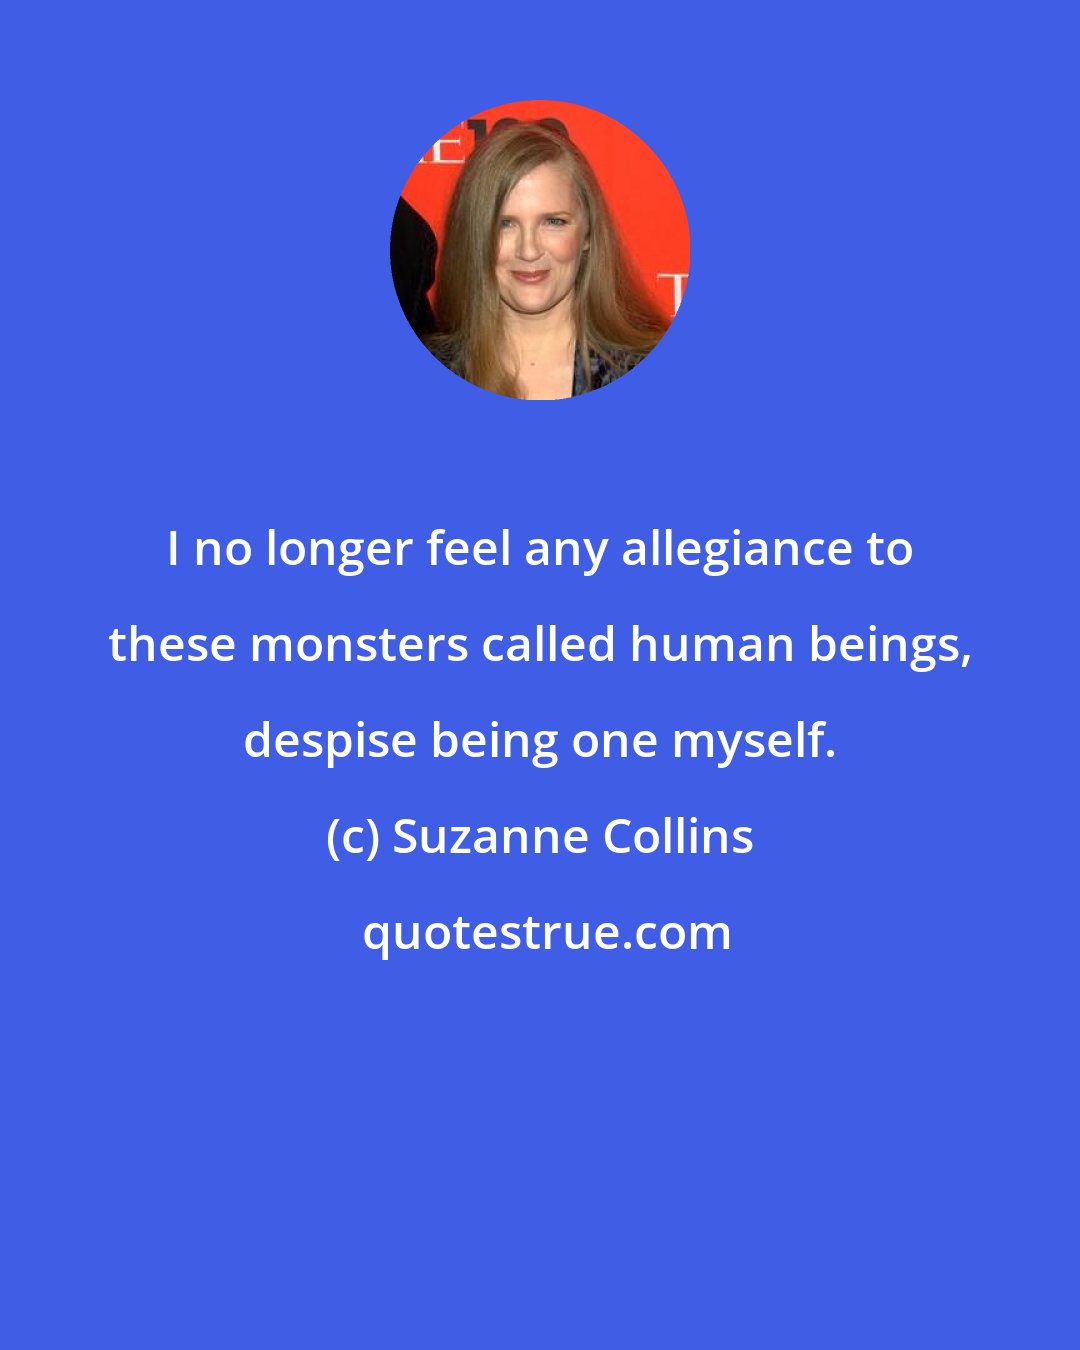 Suzanne Collins: I no longer feel any allegiance to these monsters called human beings, despise being one myself.